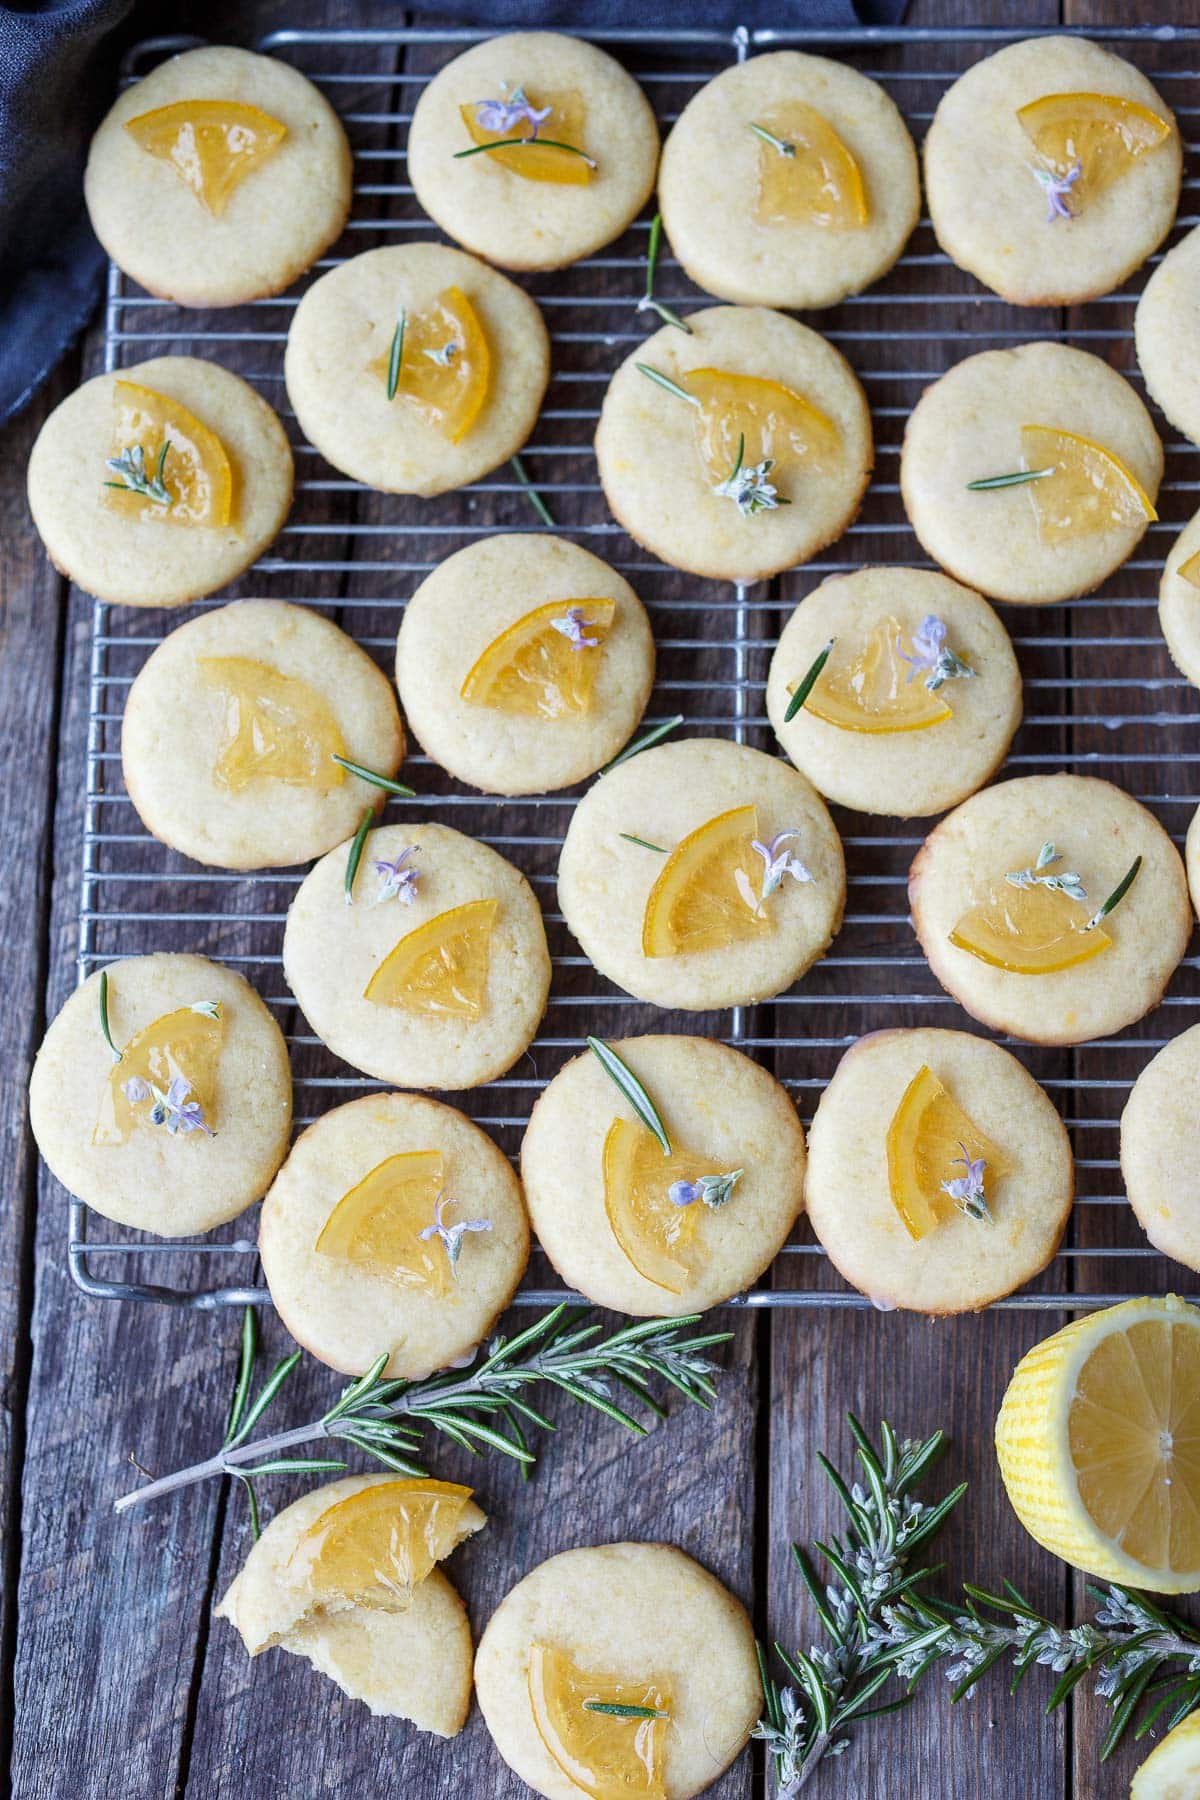 beautiful lemon cookies on wire rack, coated in lemon glaze and garnished with candied lemons, fresh rosemary and rosemary flowers.